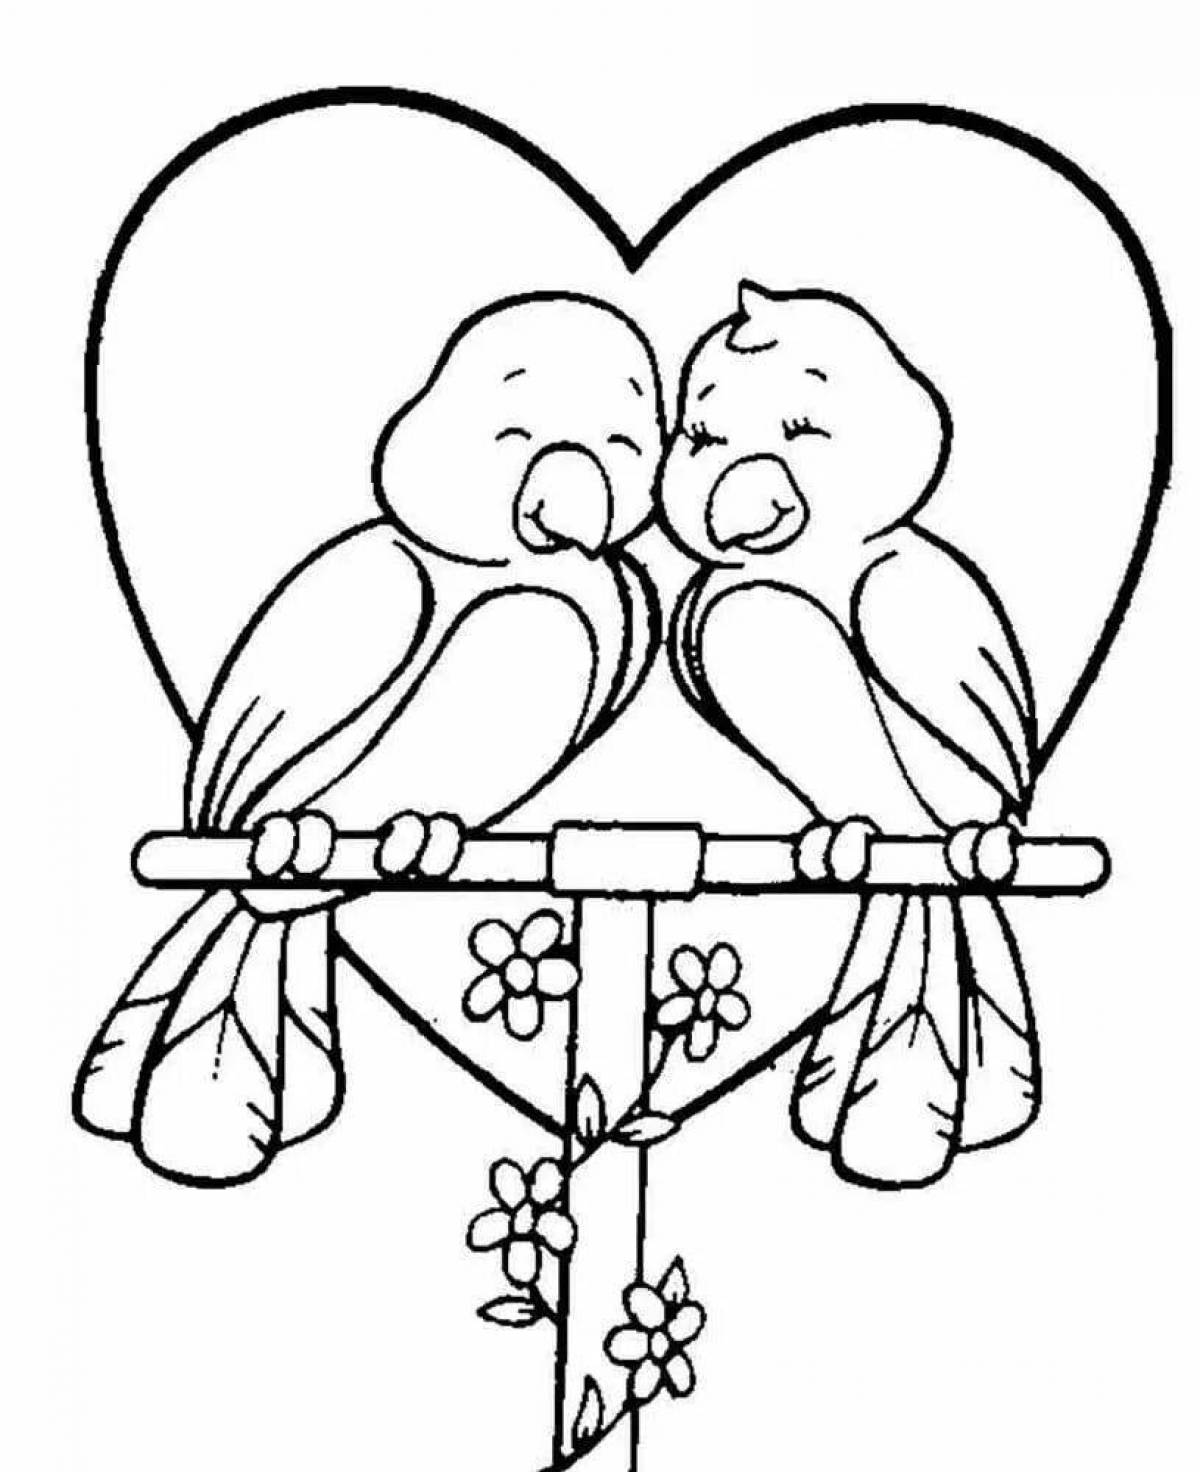 Happy valentine's day coloring page